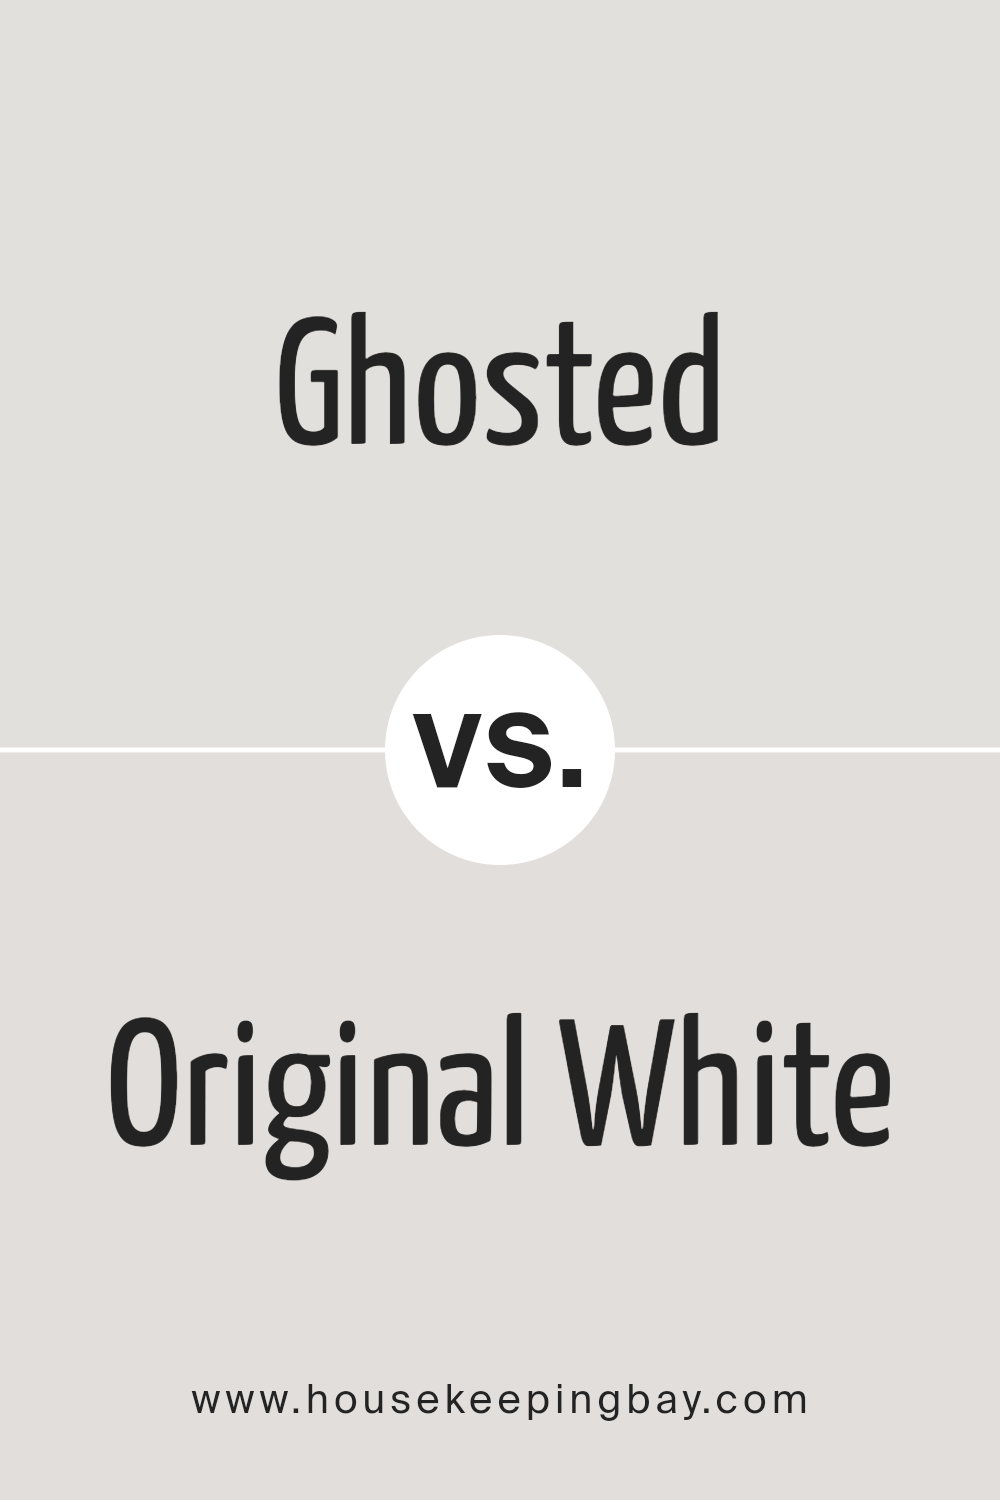 ghosted_sw_9545_vs_original_white_sw_7077